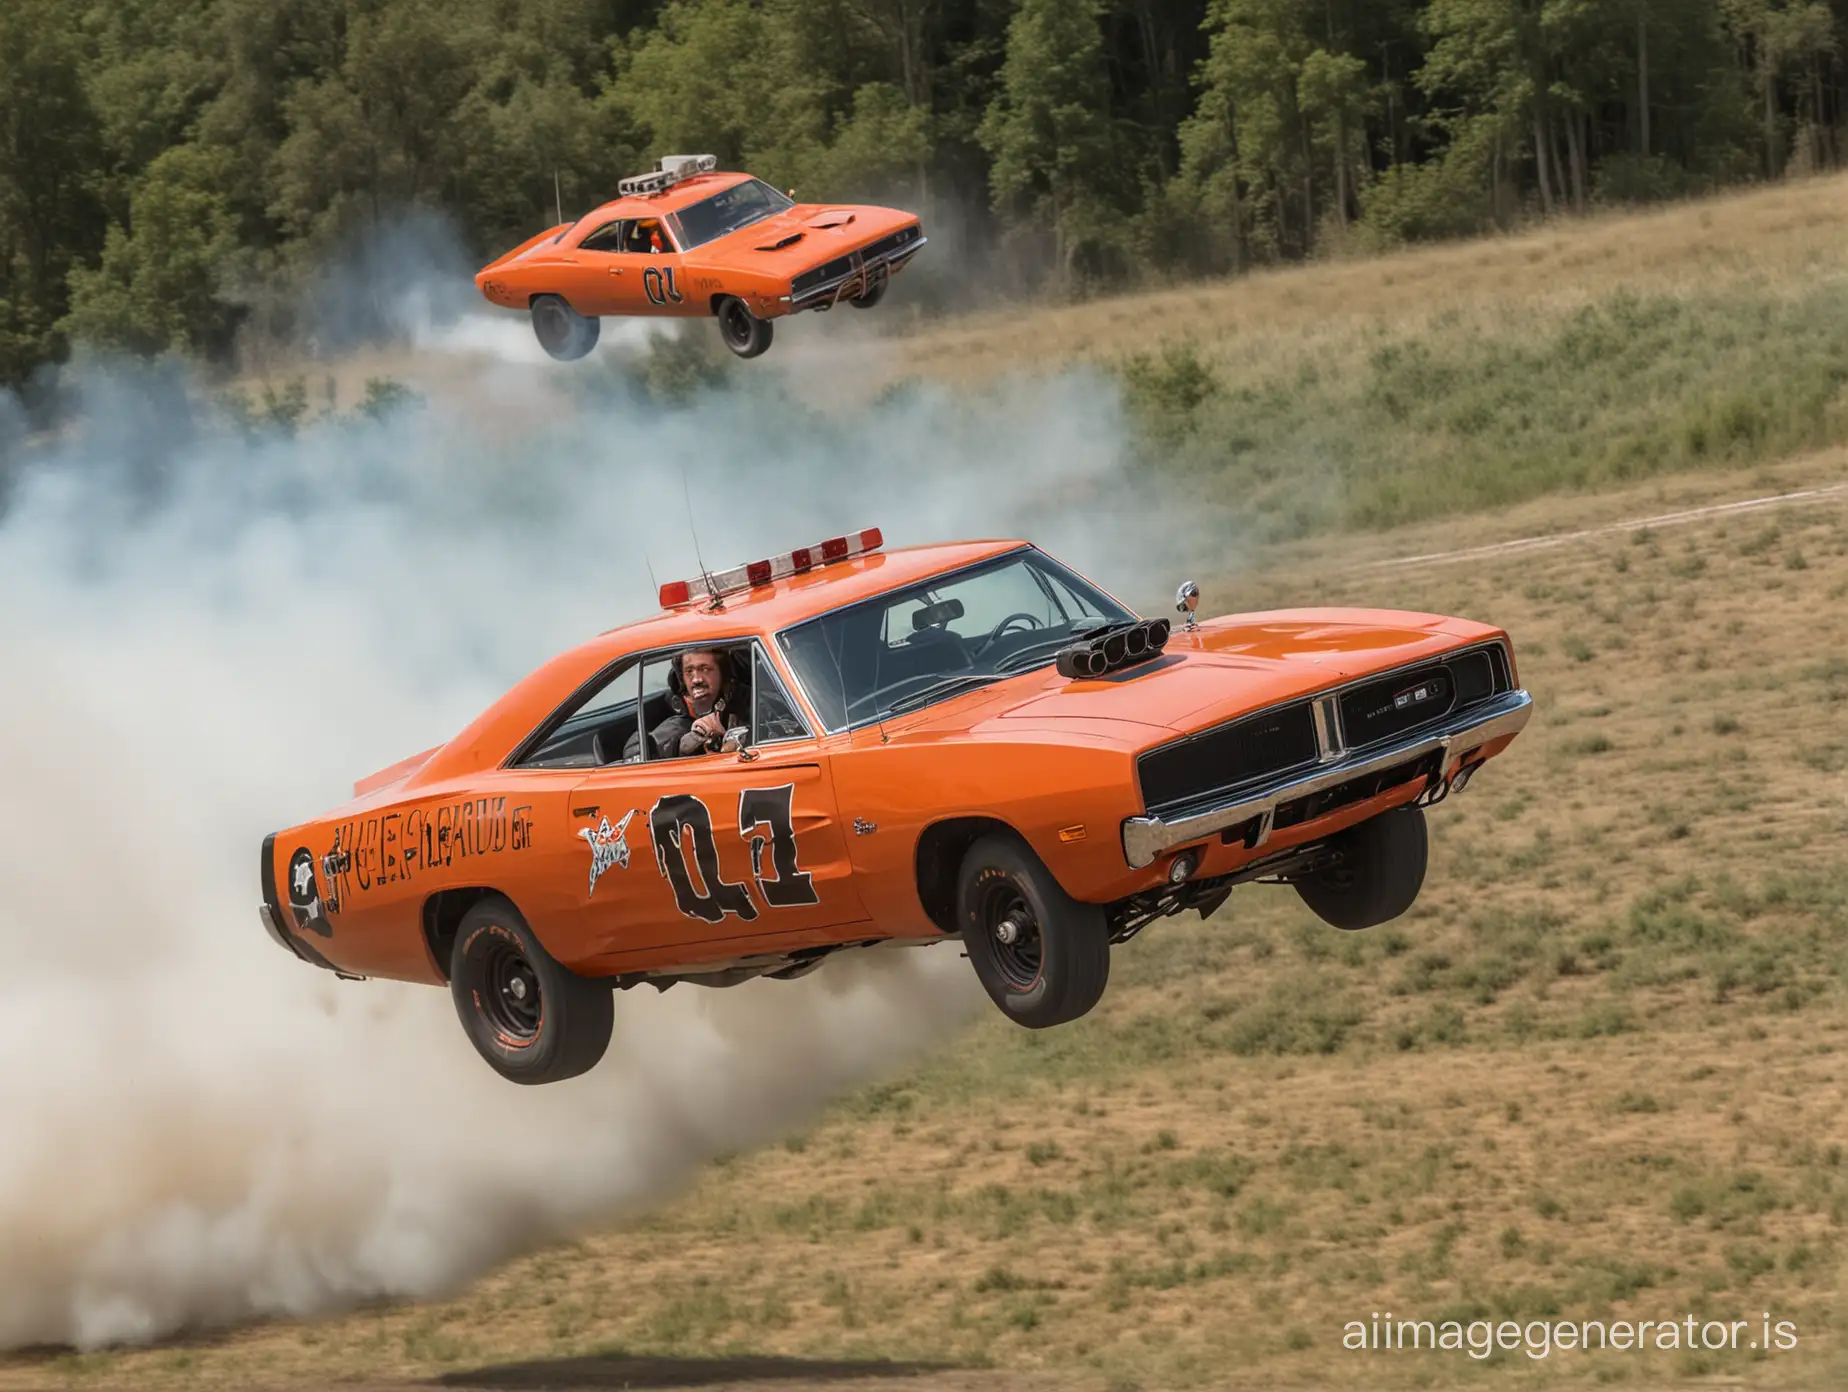 Dukes of Hazard General Lee Dodge Charger flying through the air over a 1970’s police car